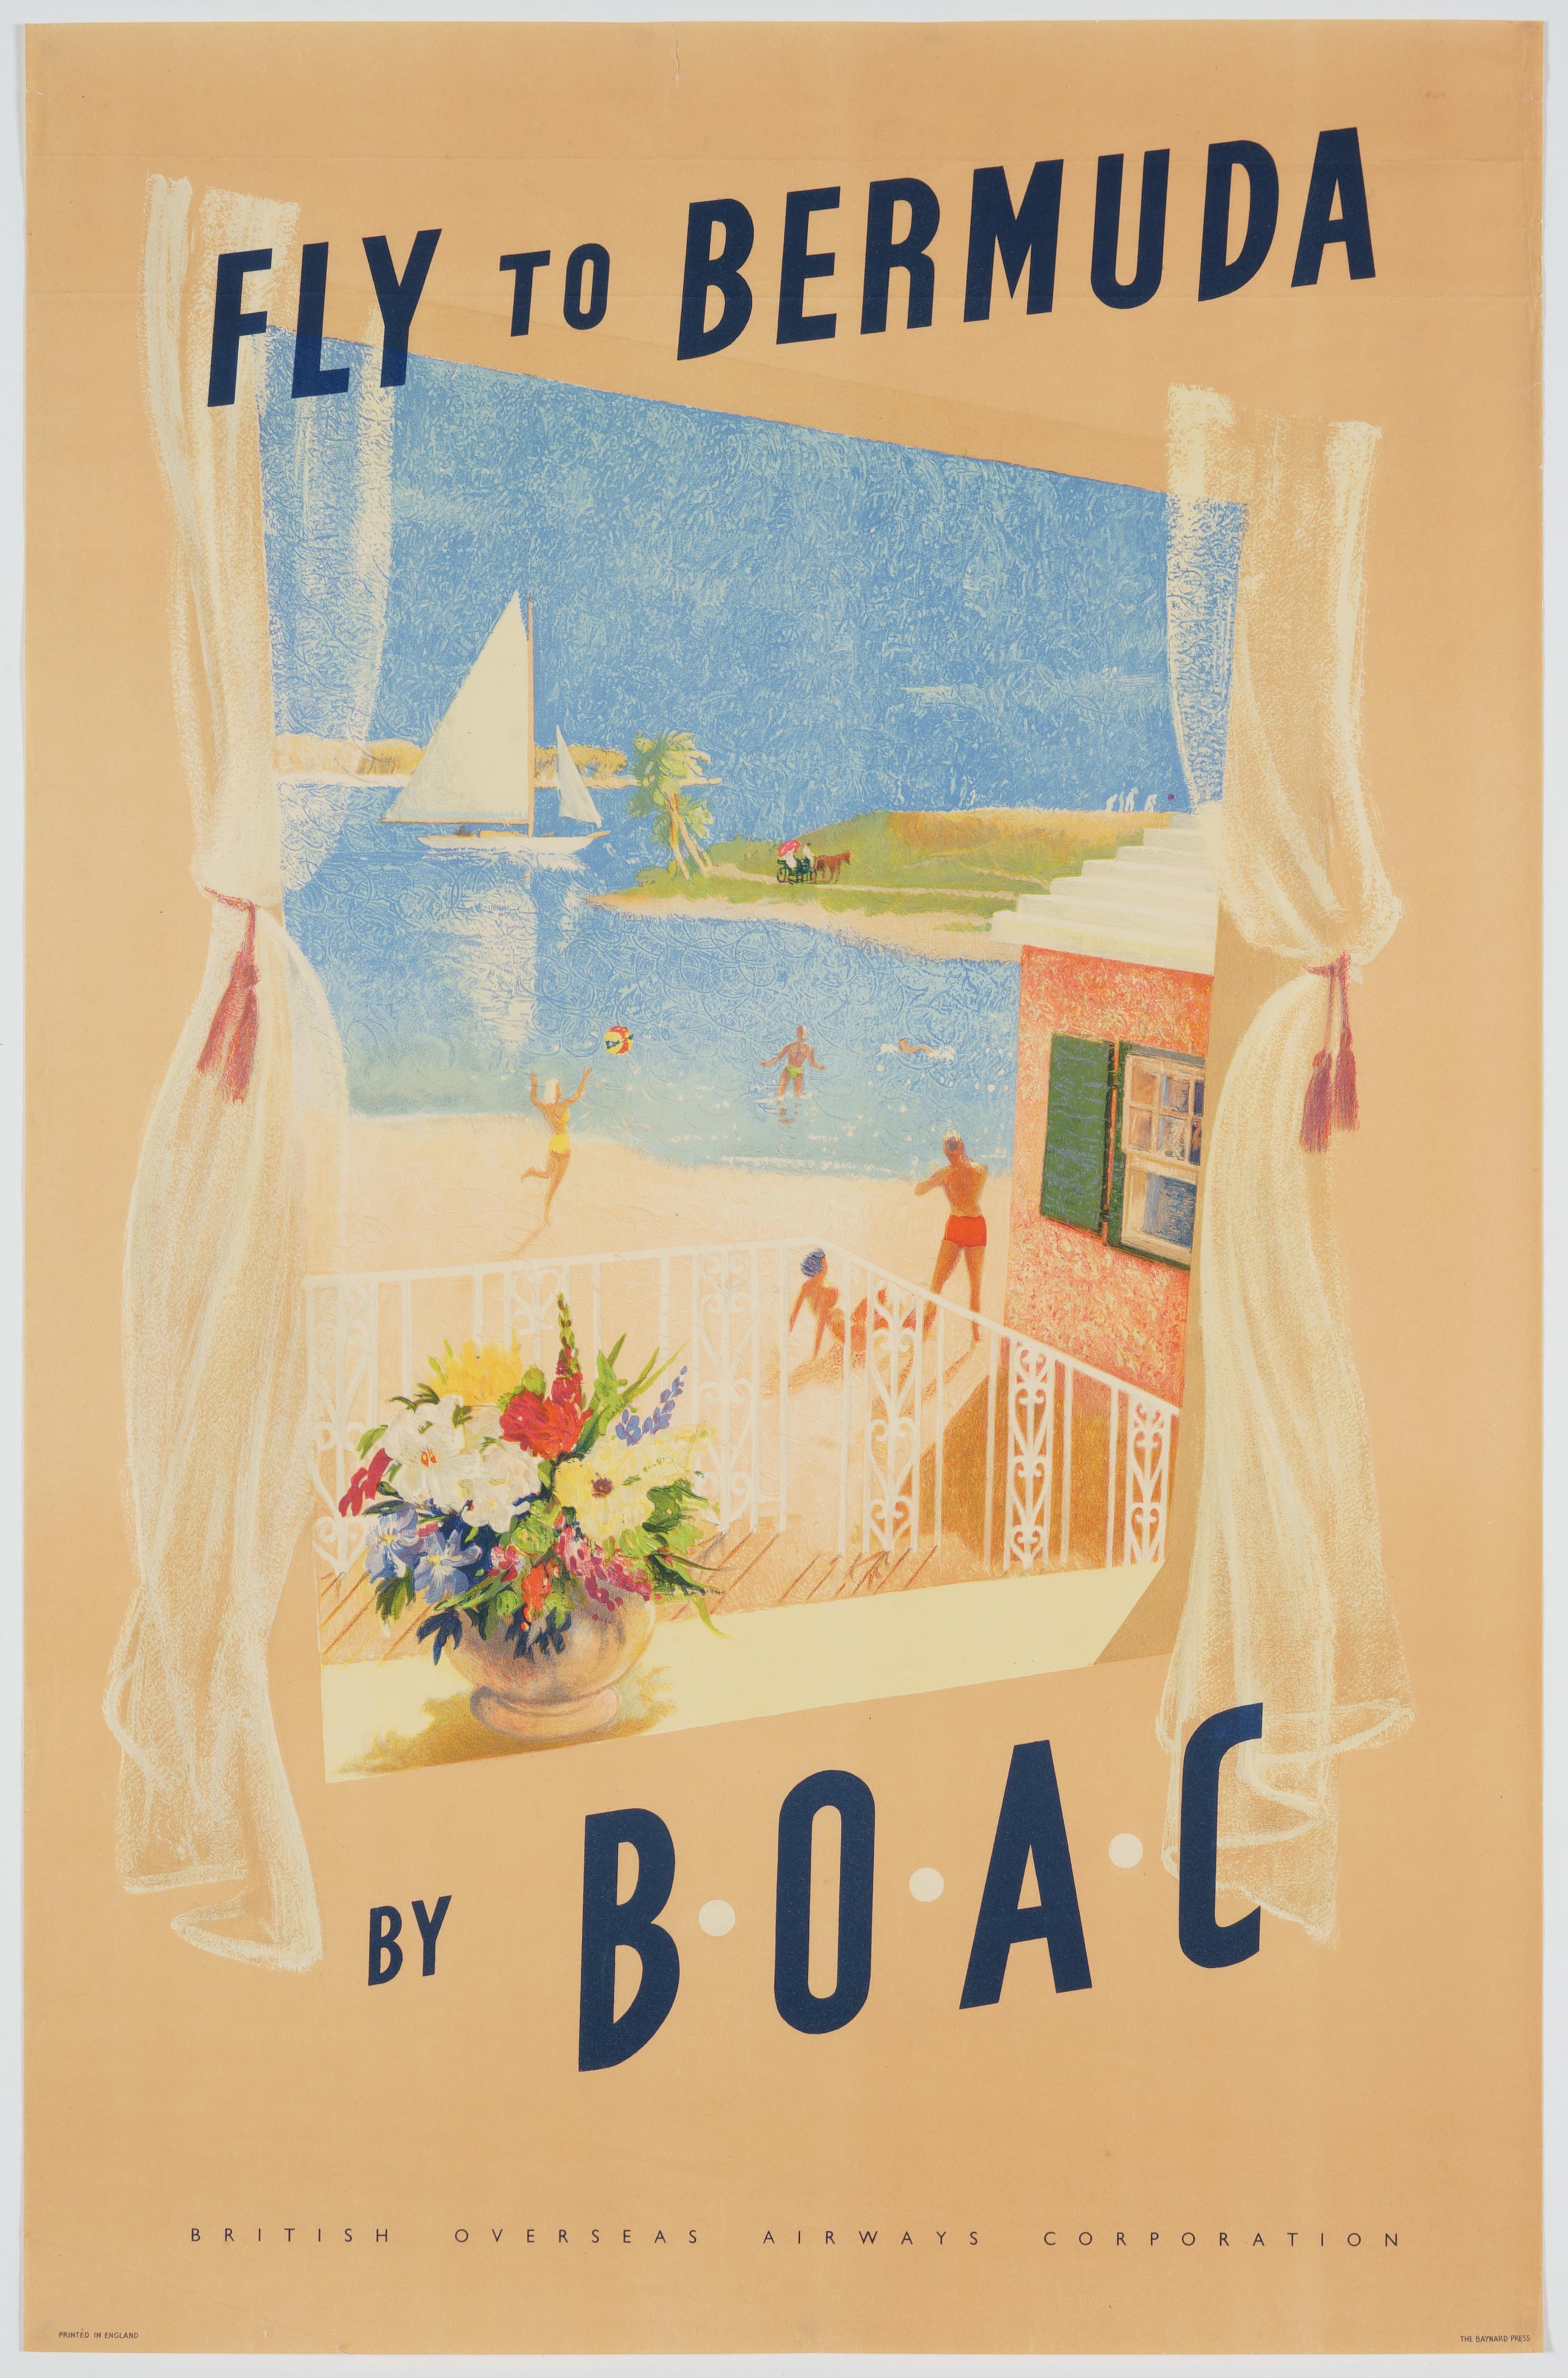 Fly to Bermuda by BOAC – Original Vintage British Airline Poster